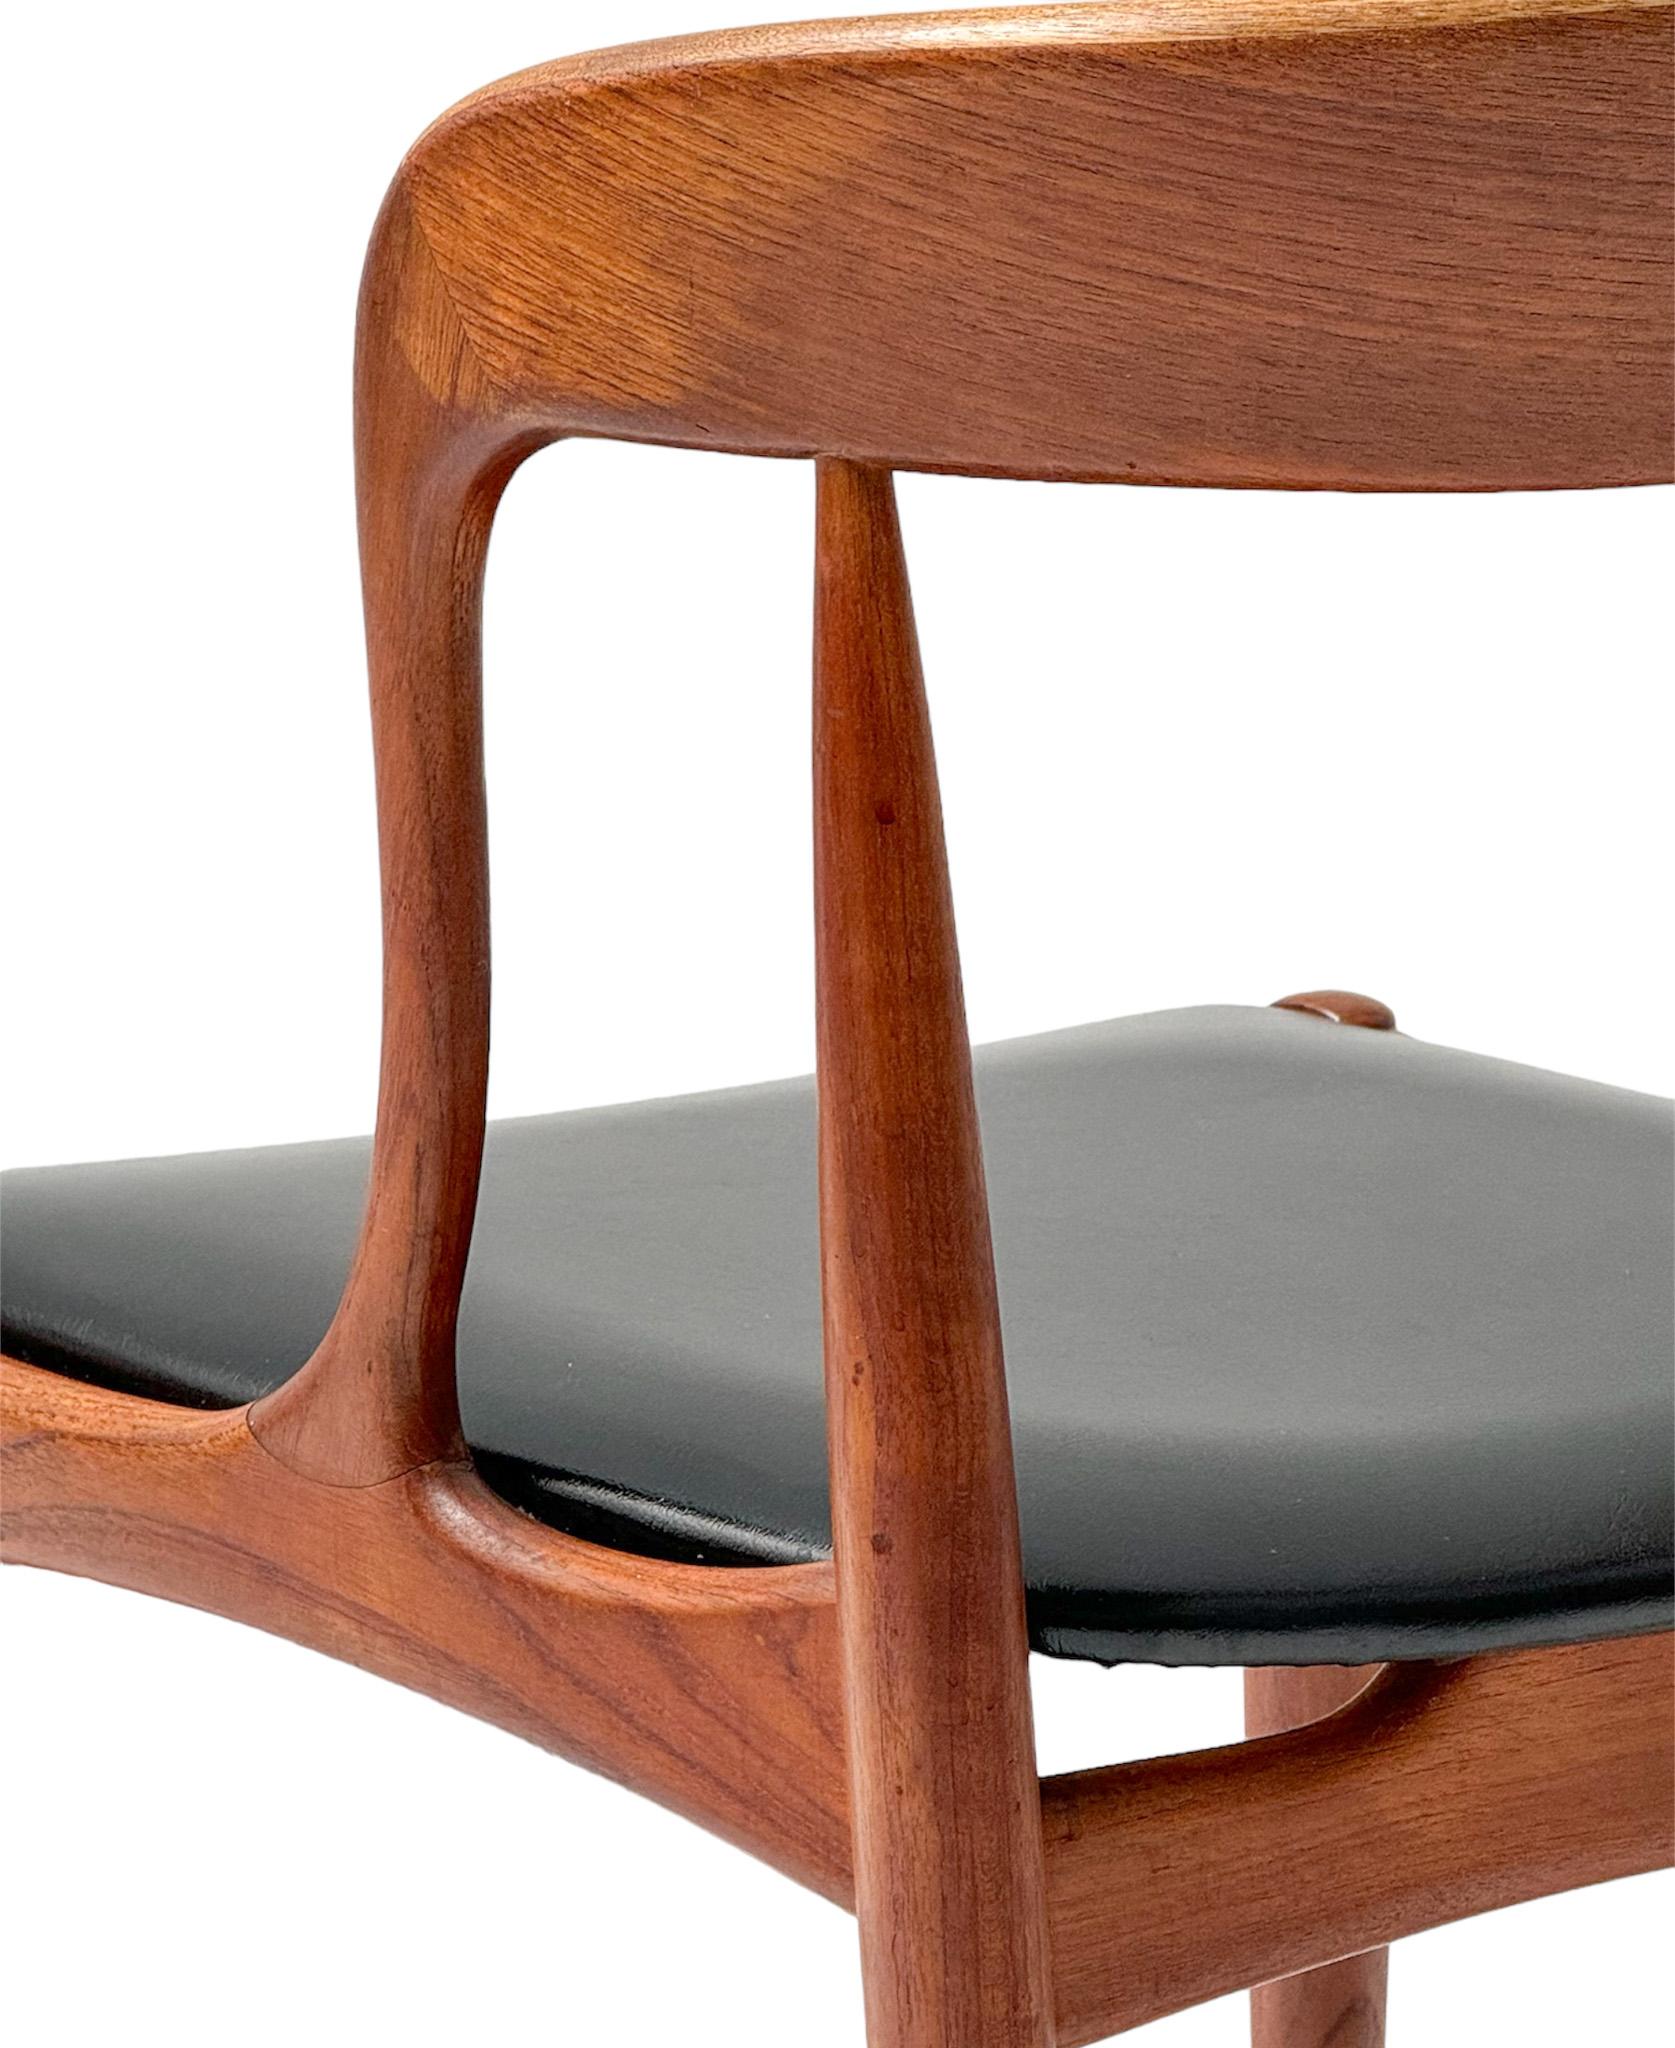 Four Teak Mid-Century Modern Dining Chairs by Johannes Andersen for Uldum, 1960s For Sale 10